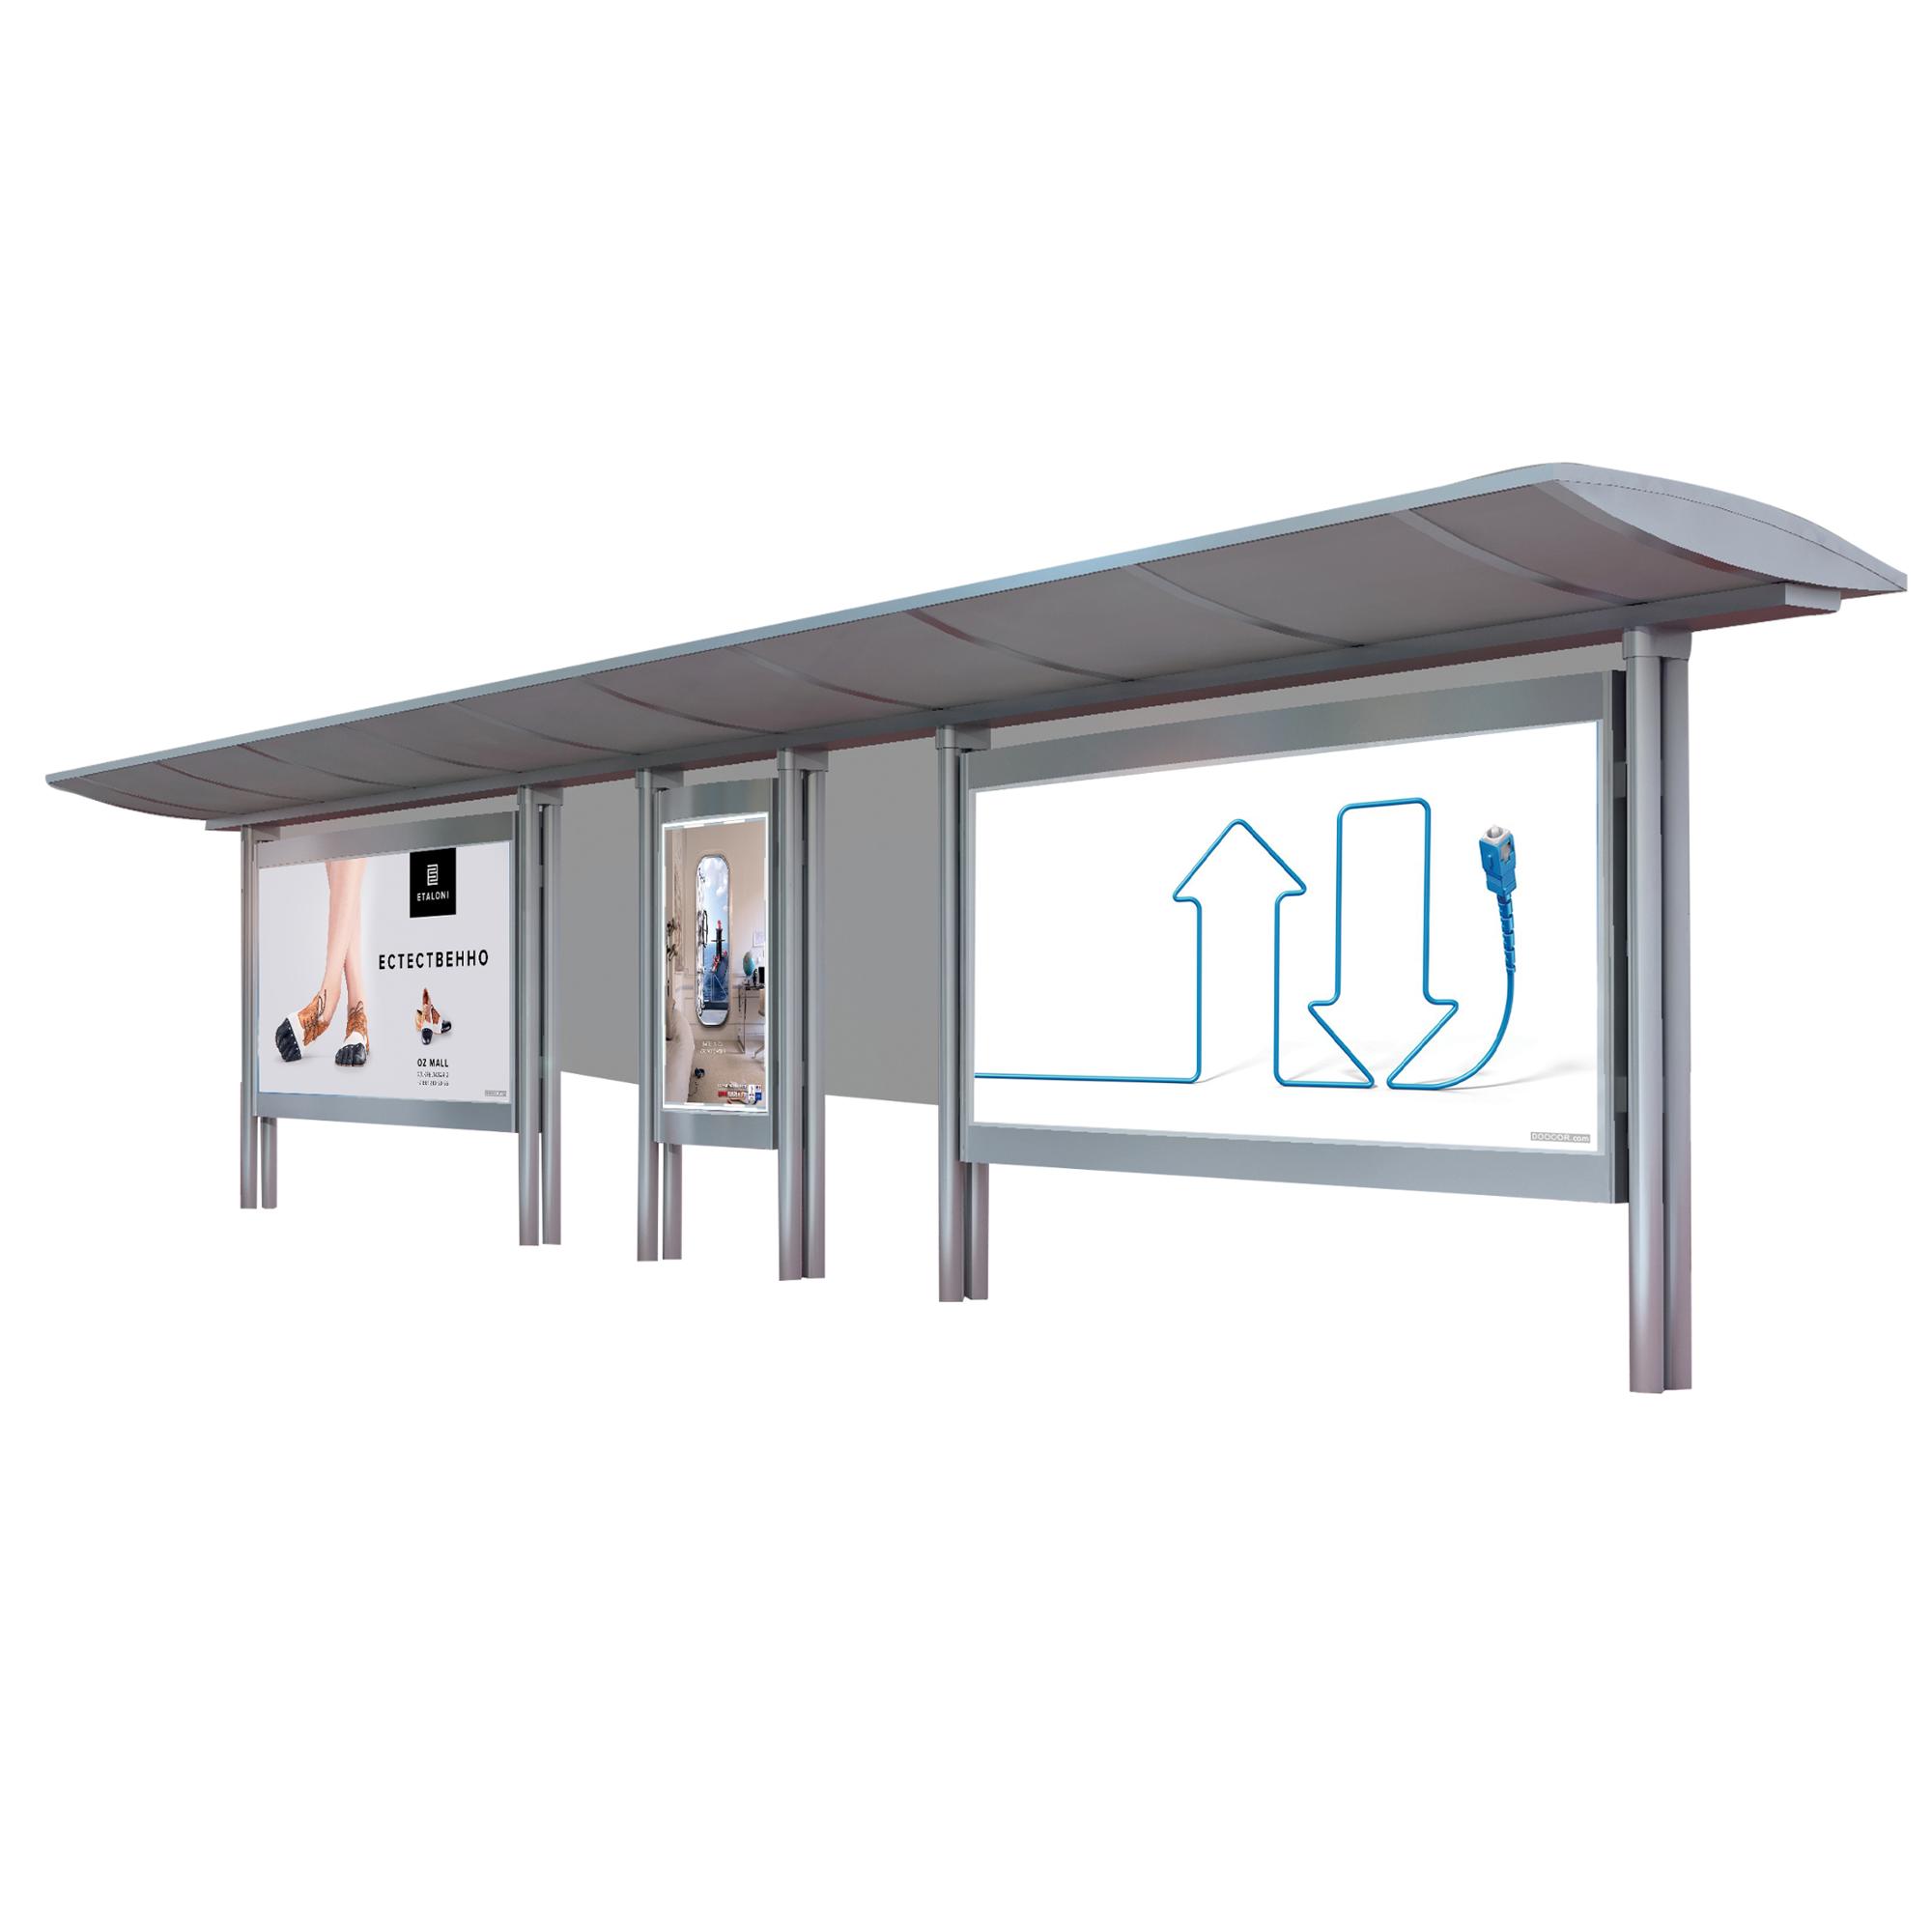 High quality stainless steel bus shelter advertising